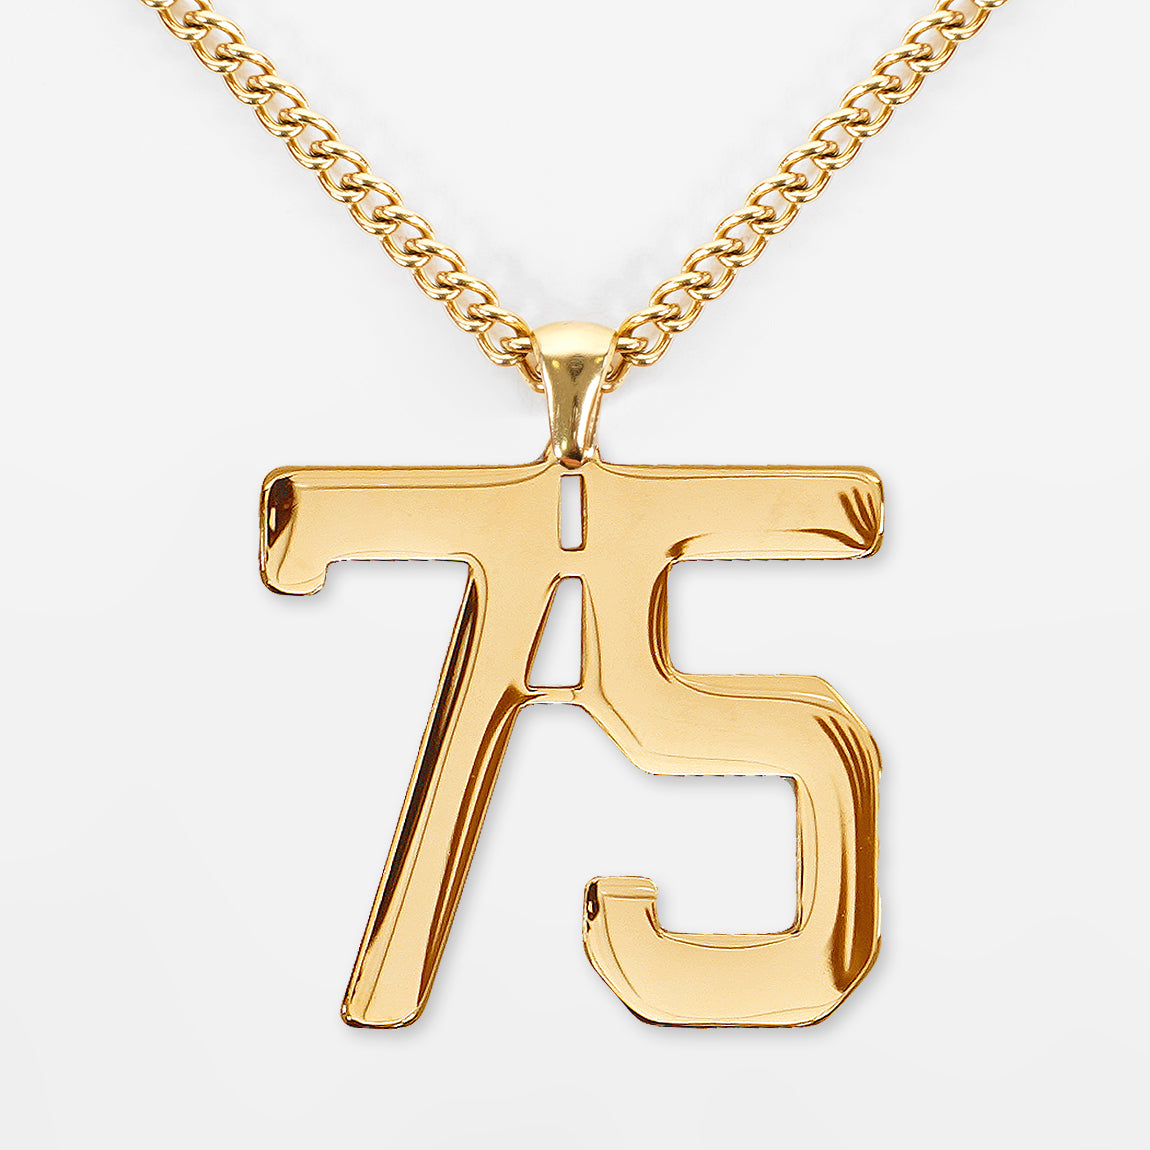 75 Number Pendant with Chain Necklace - Gold Plated Stainless Steel